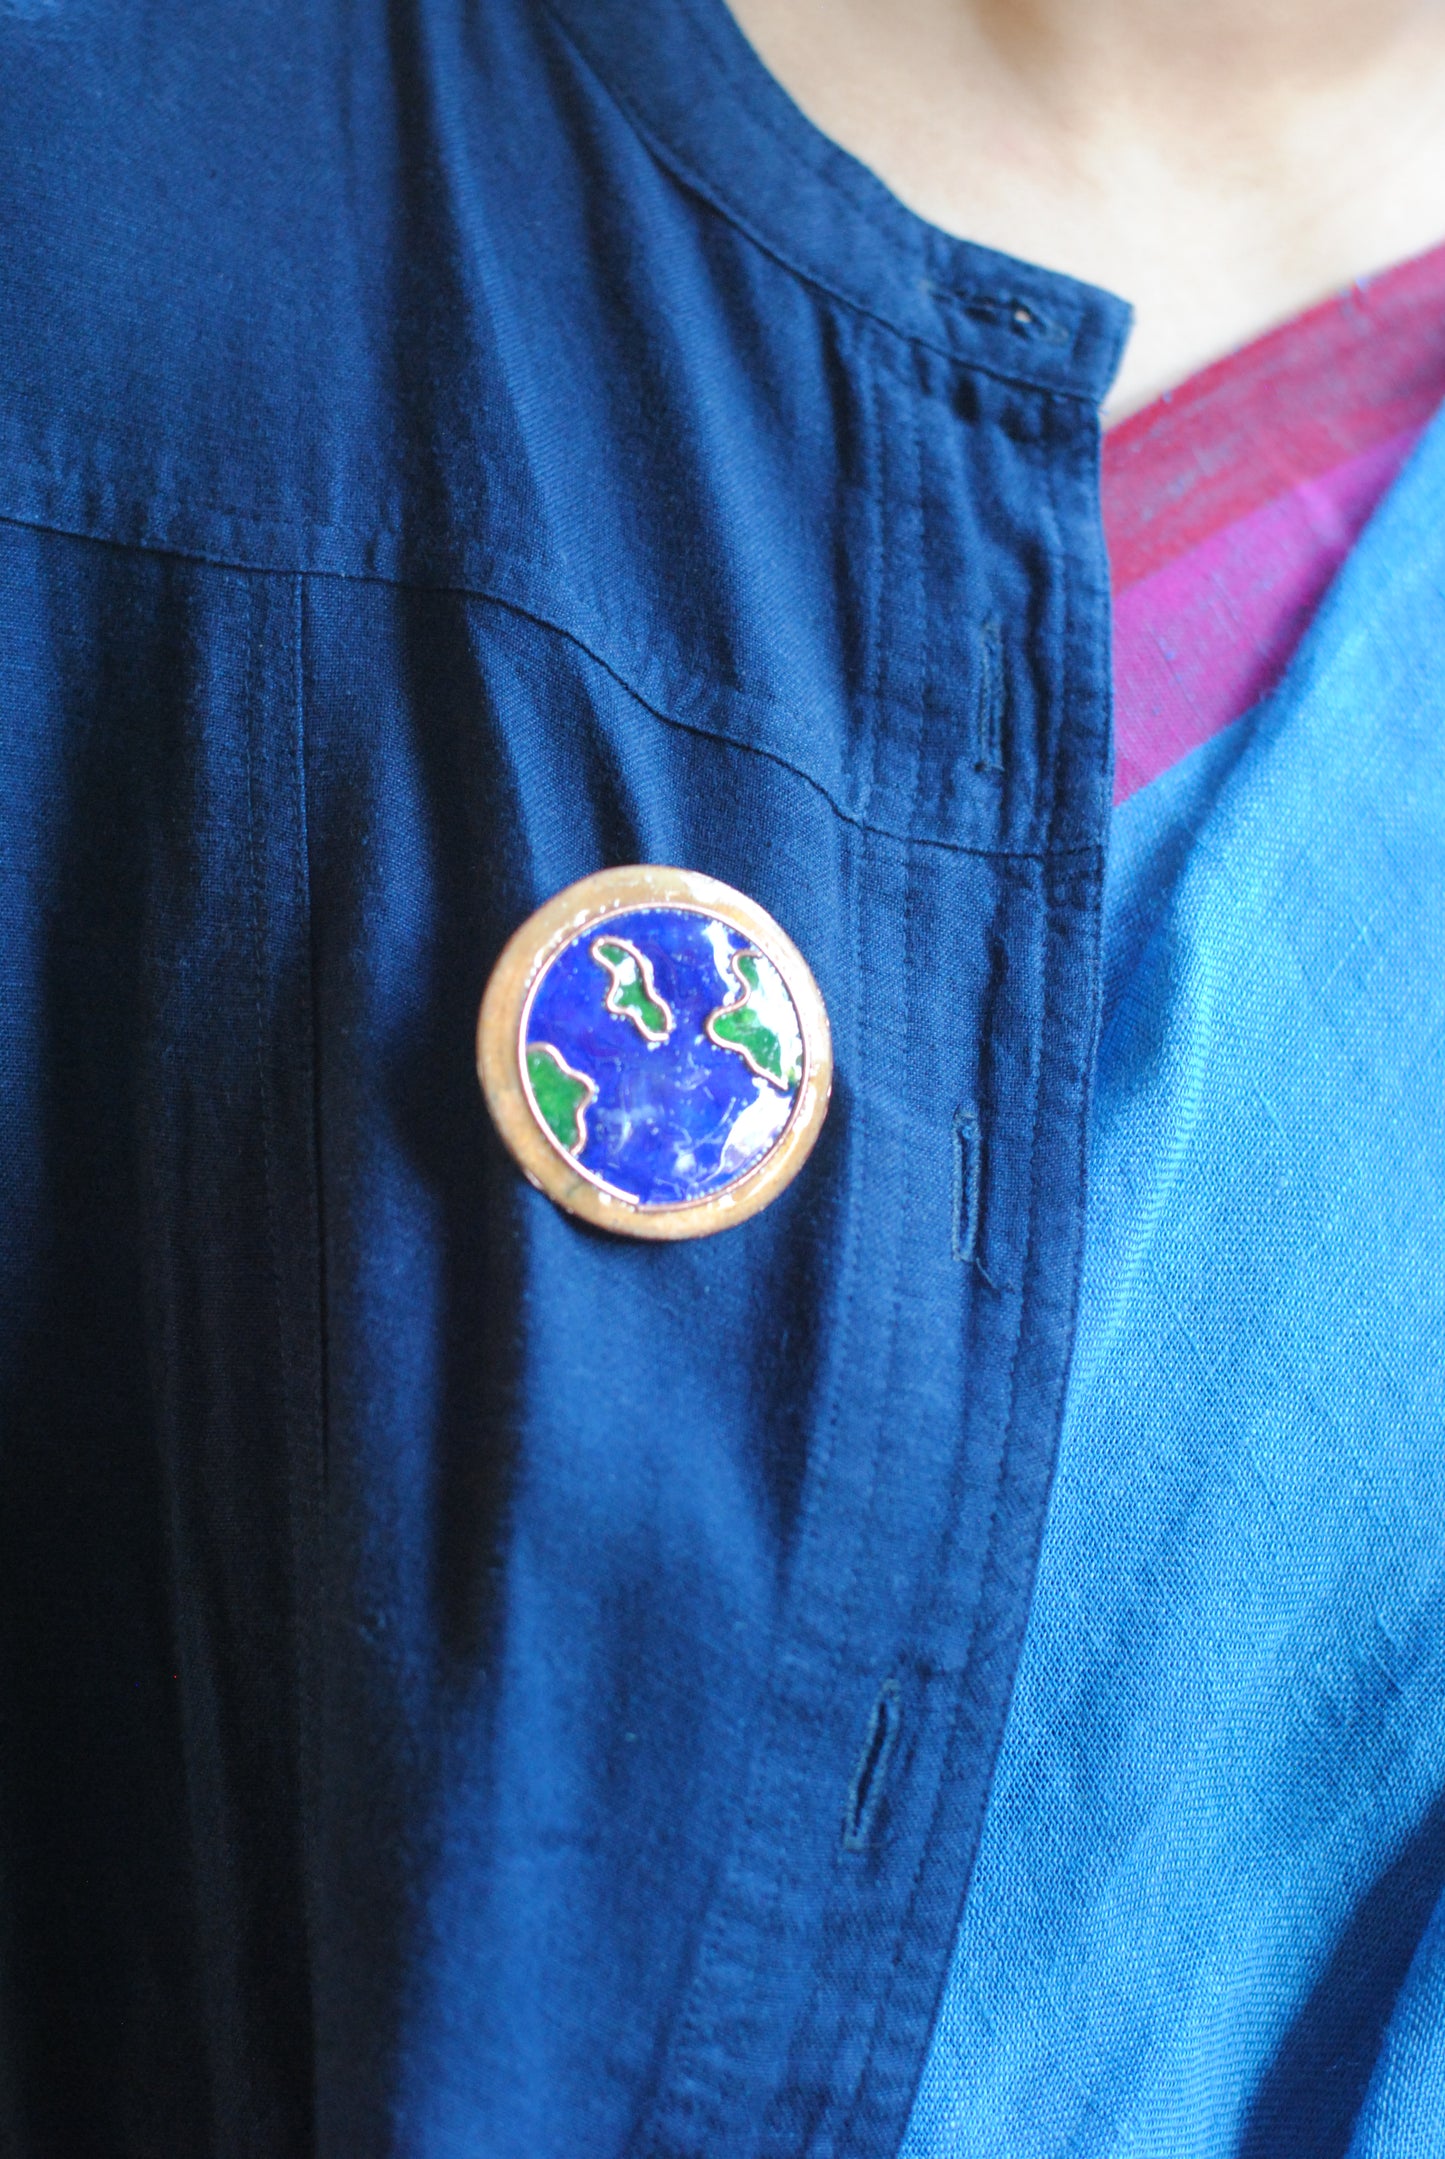 Copper enamel trinkets, funky lapel pins handcrafted in Maharashtra, India. World map theme